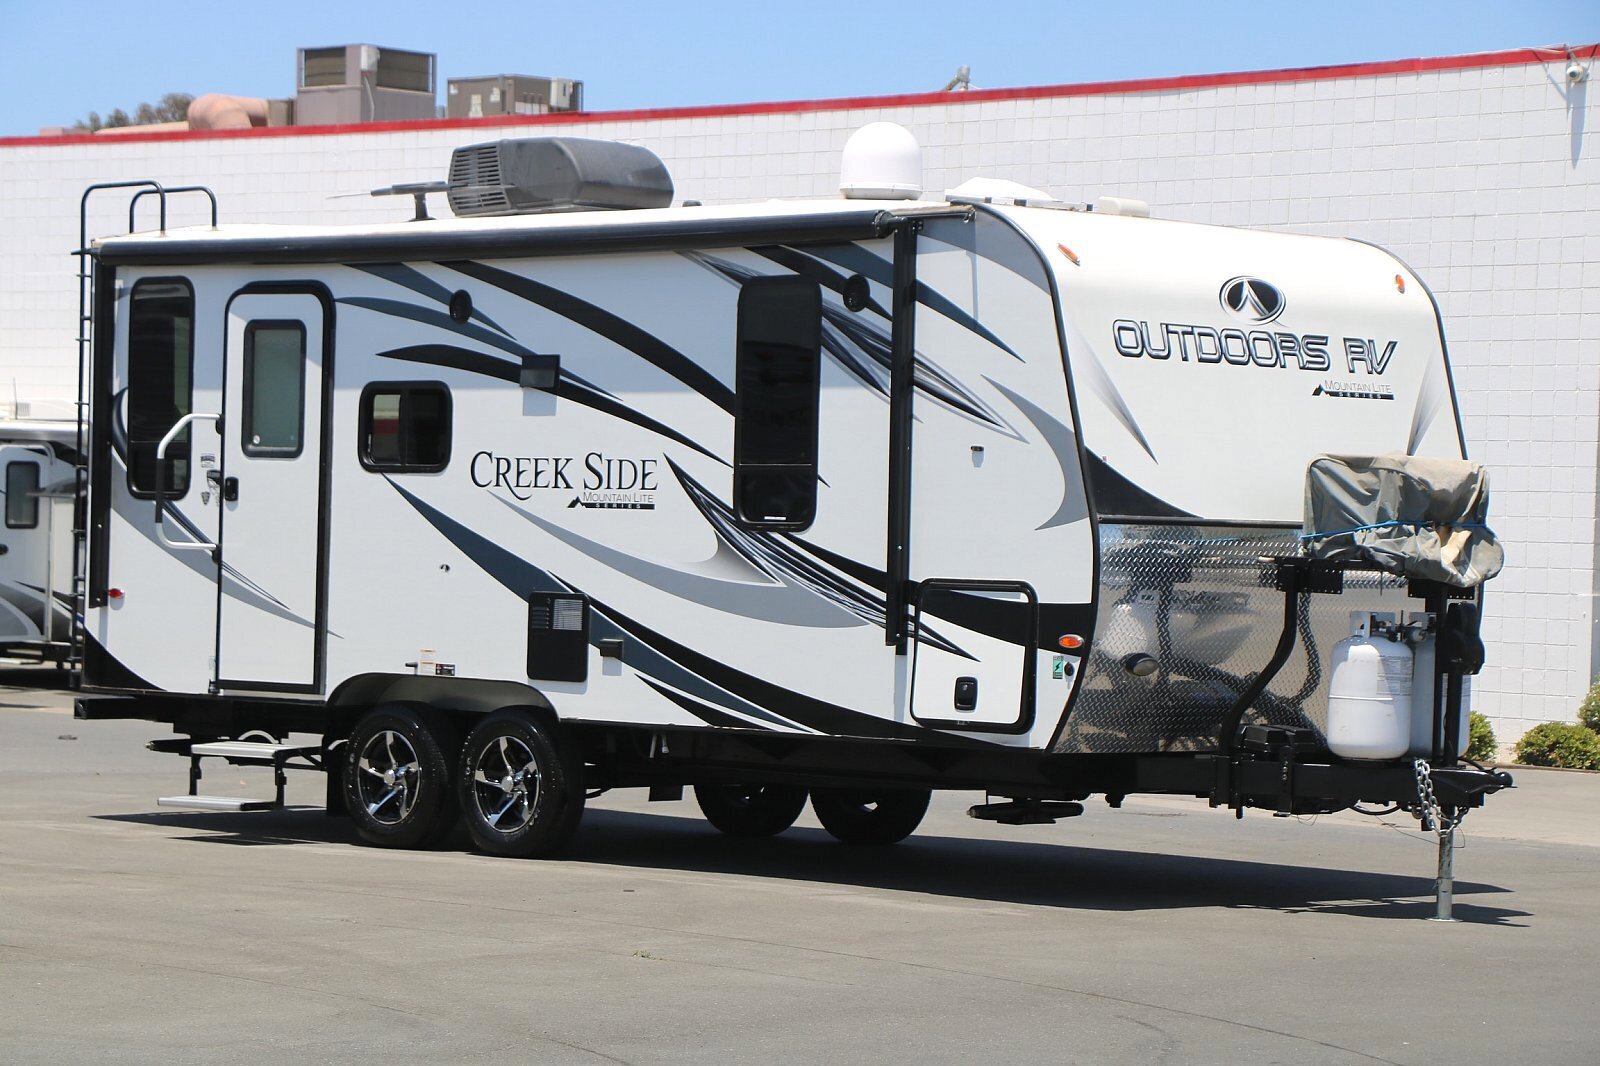 2017 OUTDOORS RV CREEKSIDE 20FQ